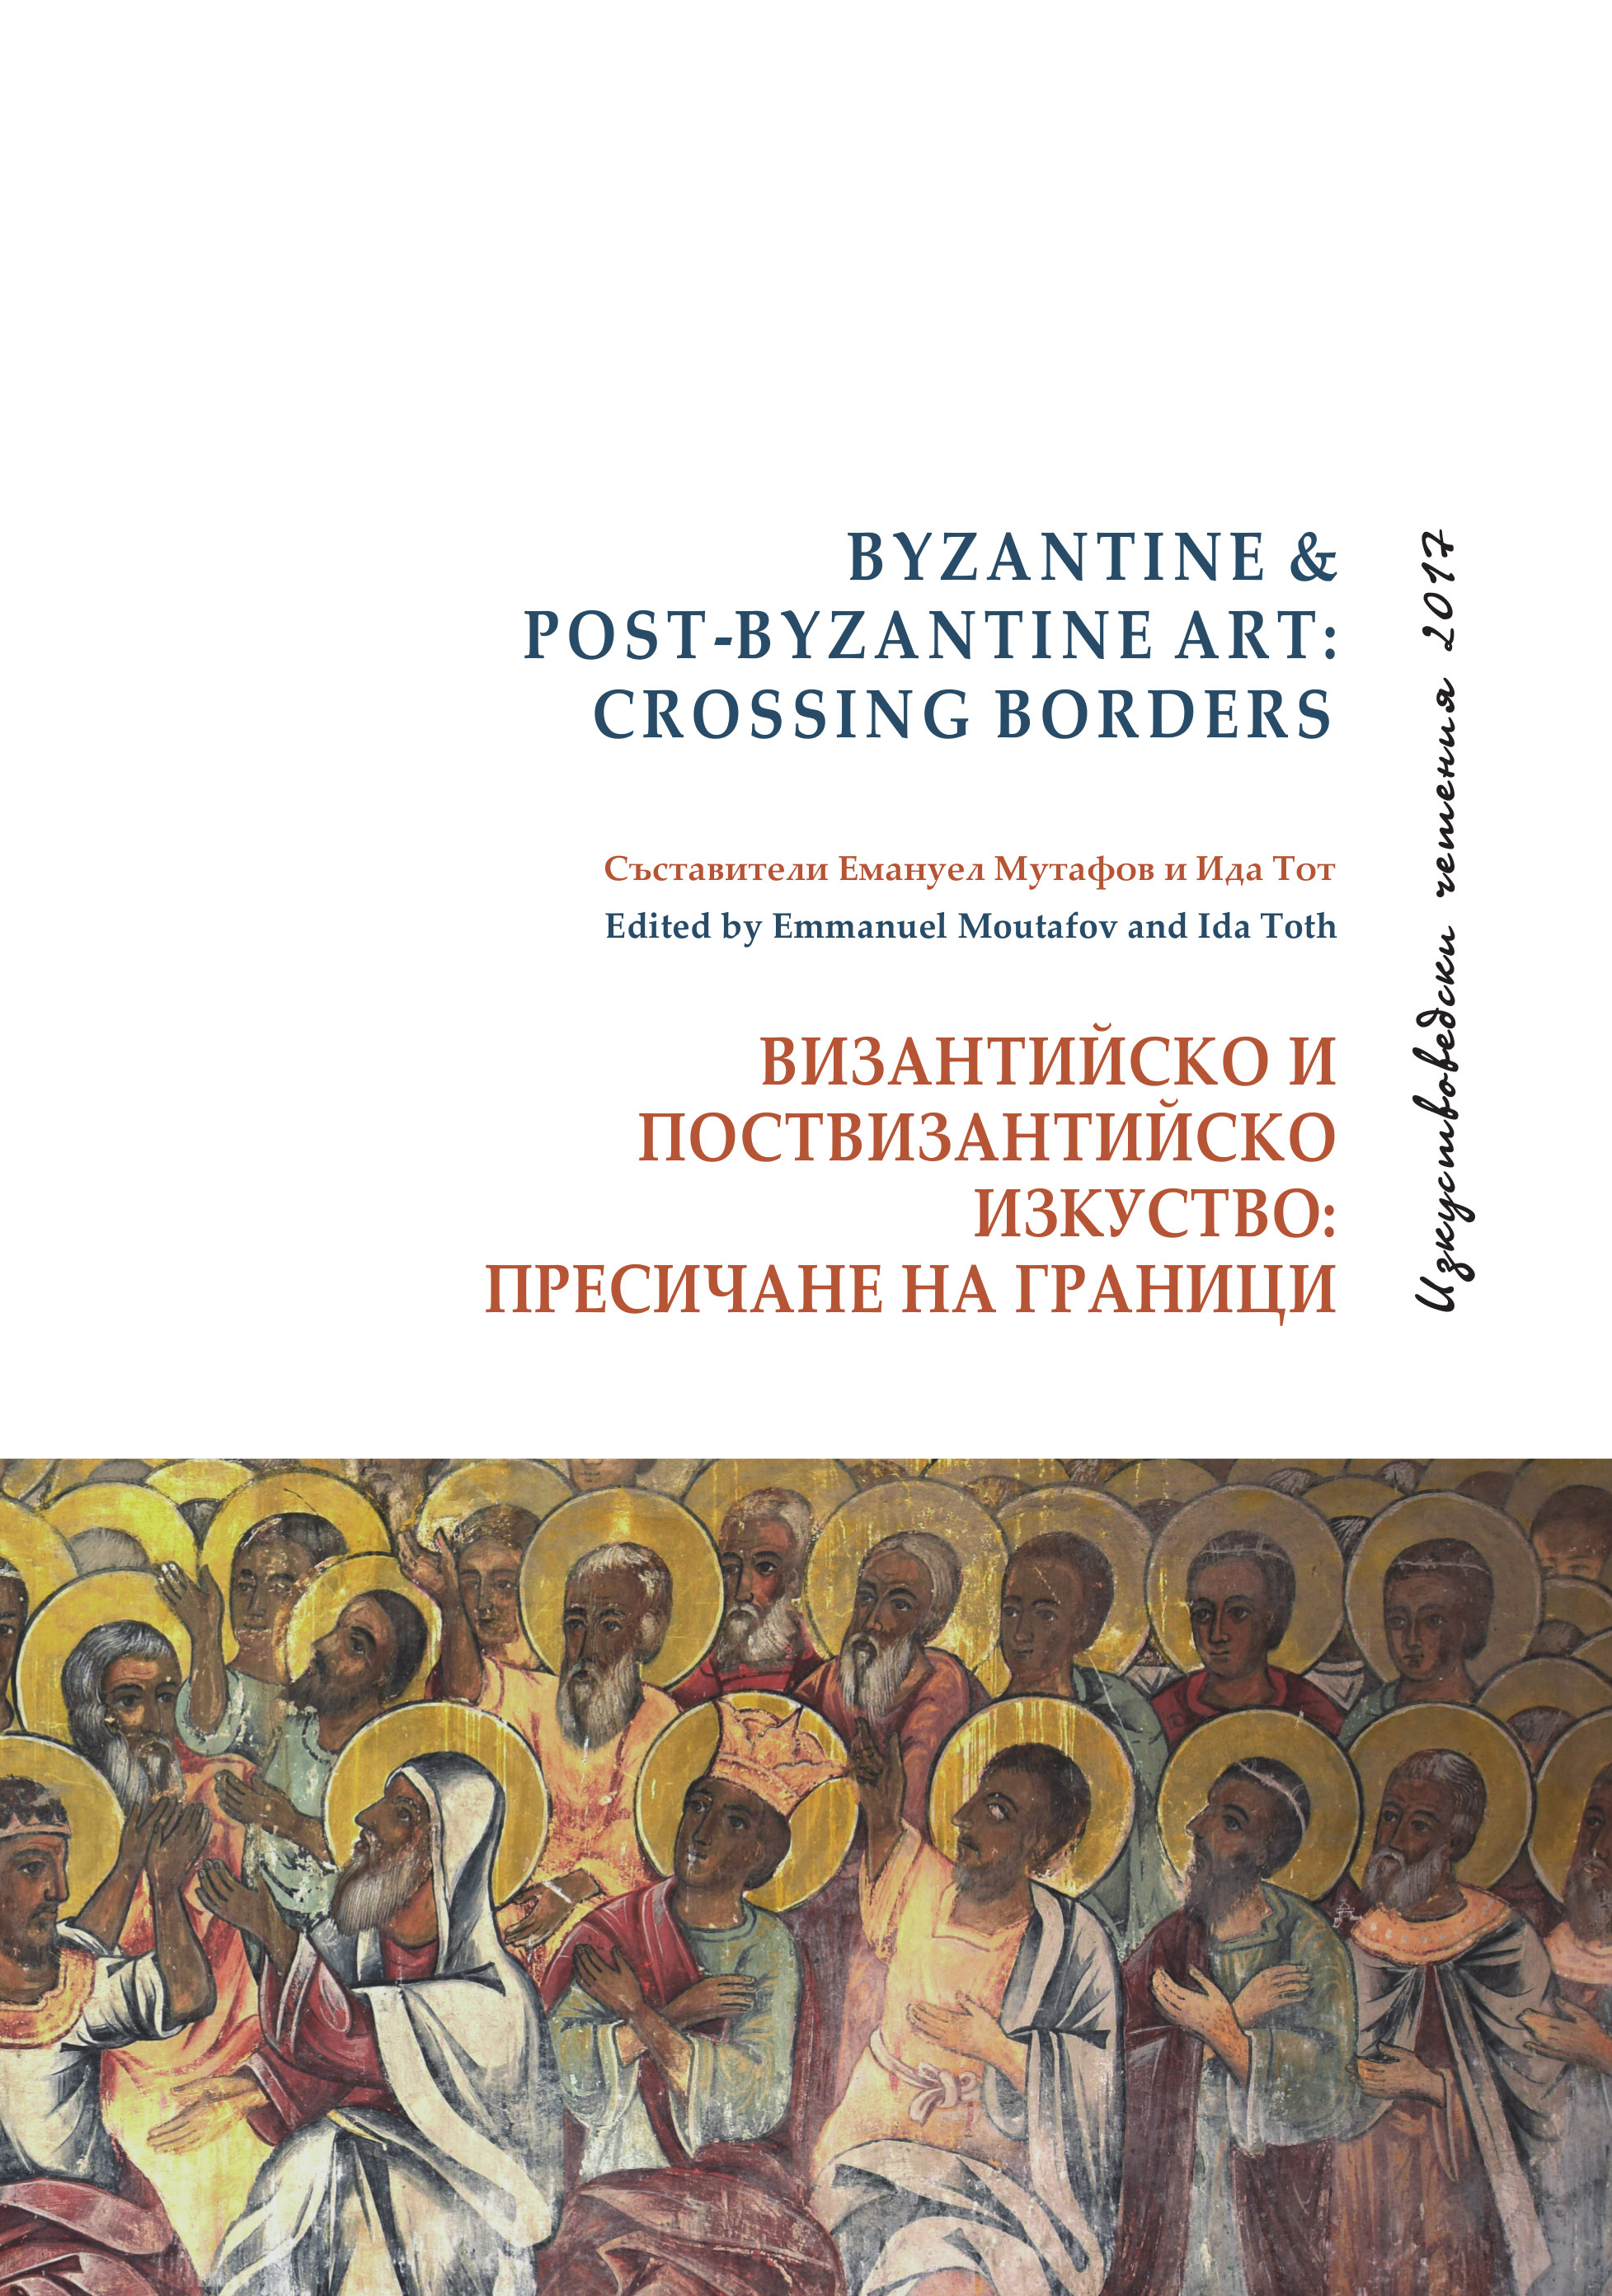 The Illustrated Slavonic Miscellanies of Damascenes Studite’s Thesauros – a New Context for Gospel Illustrations in the Seventeenth Century Cover Image